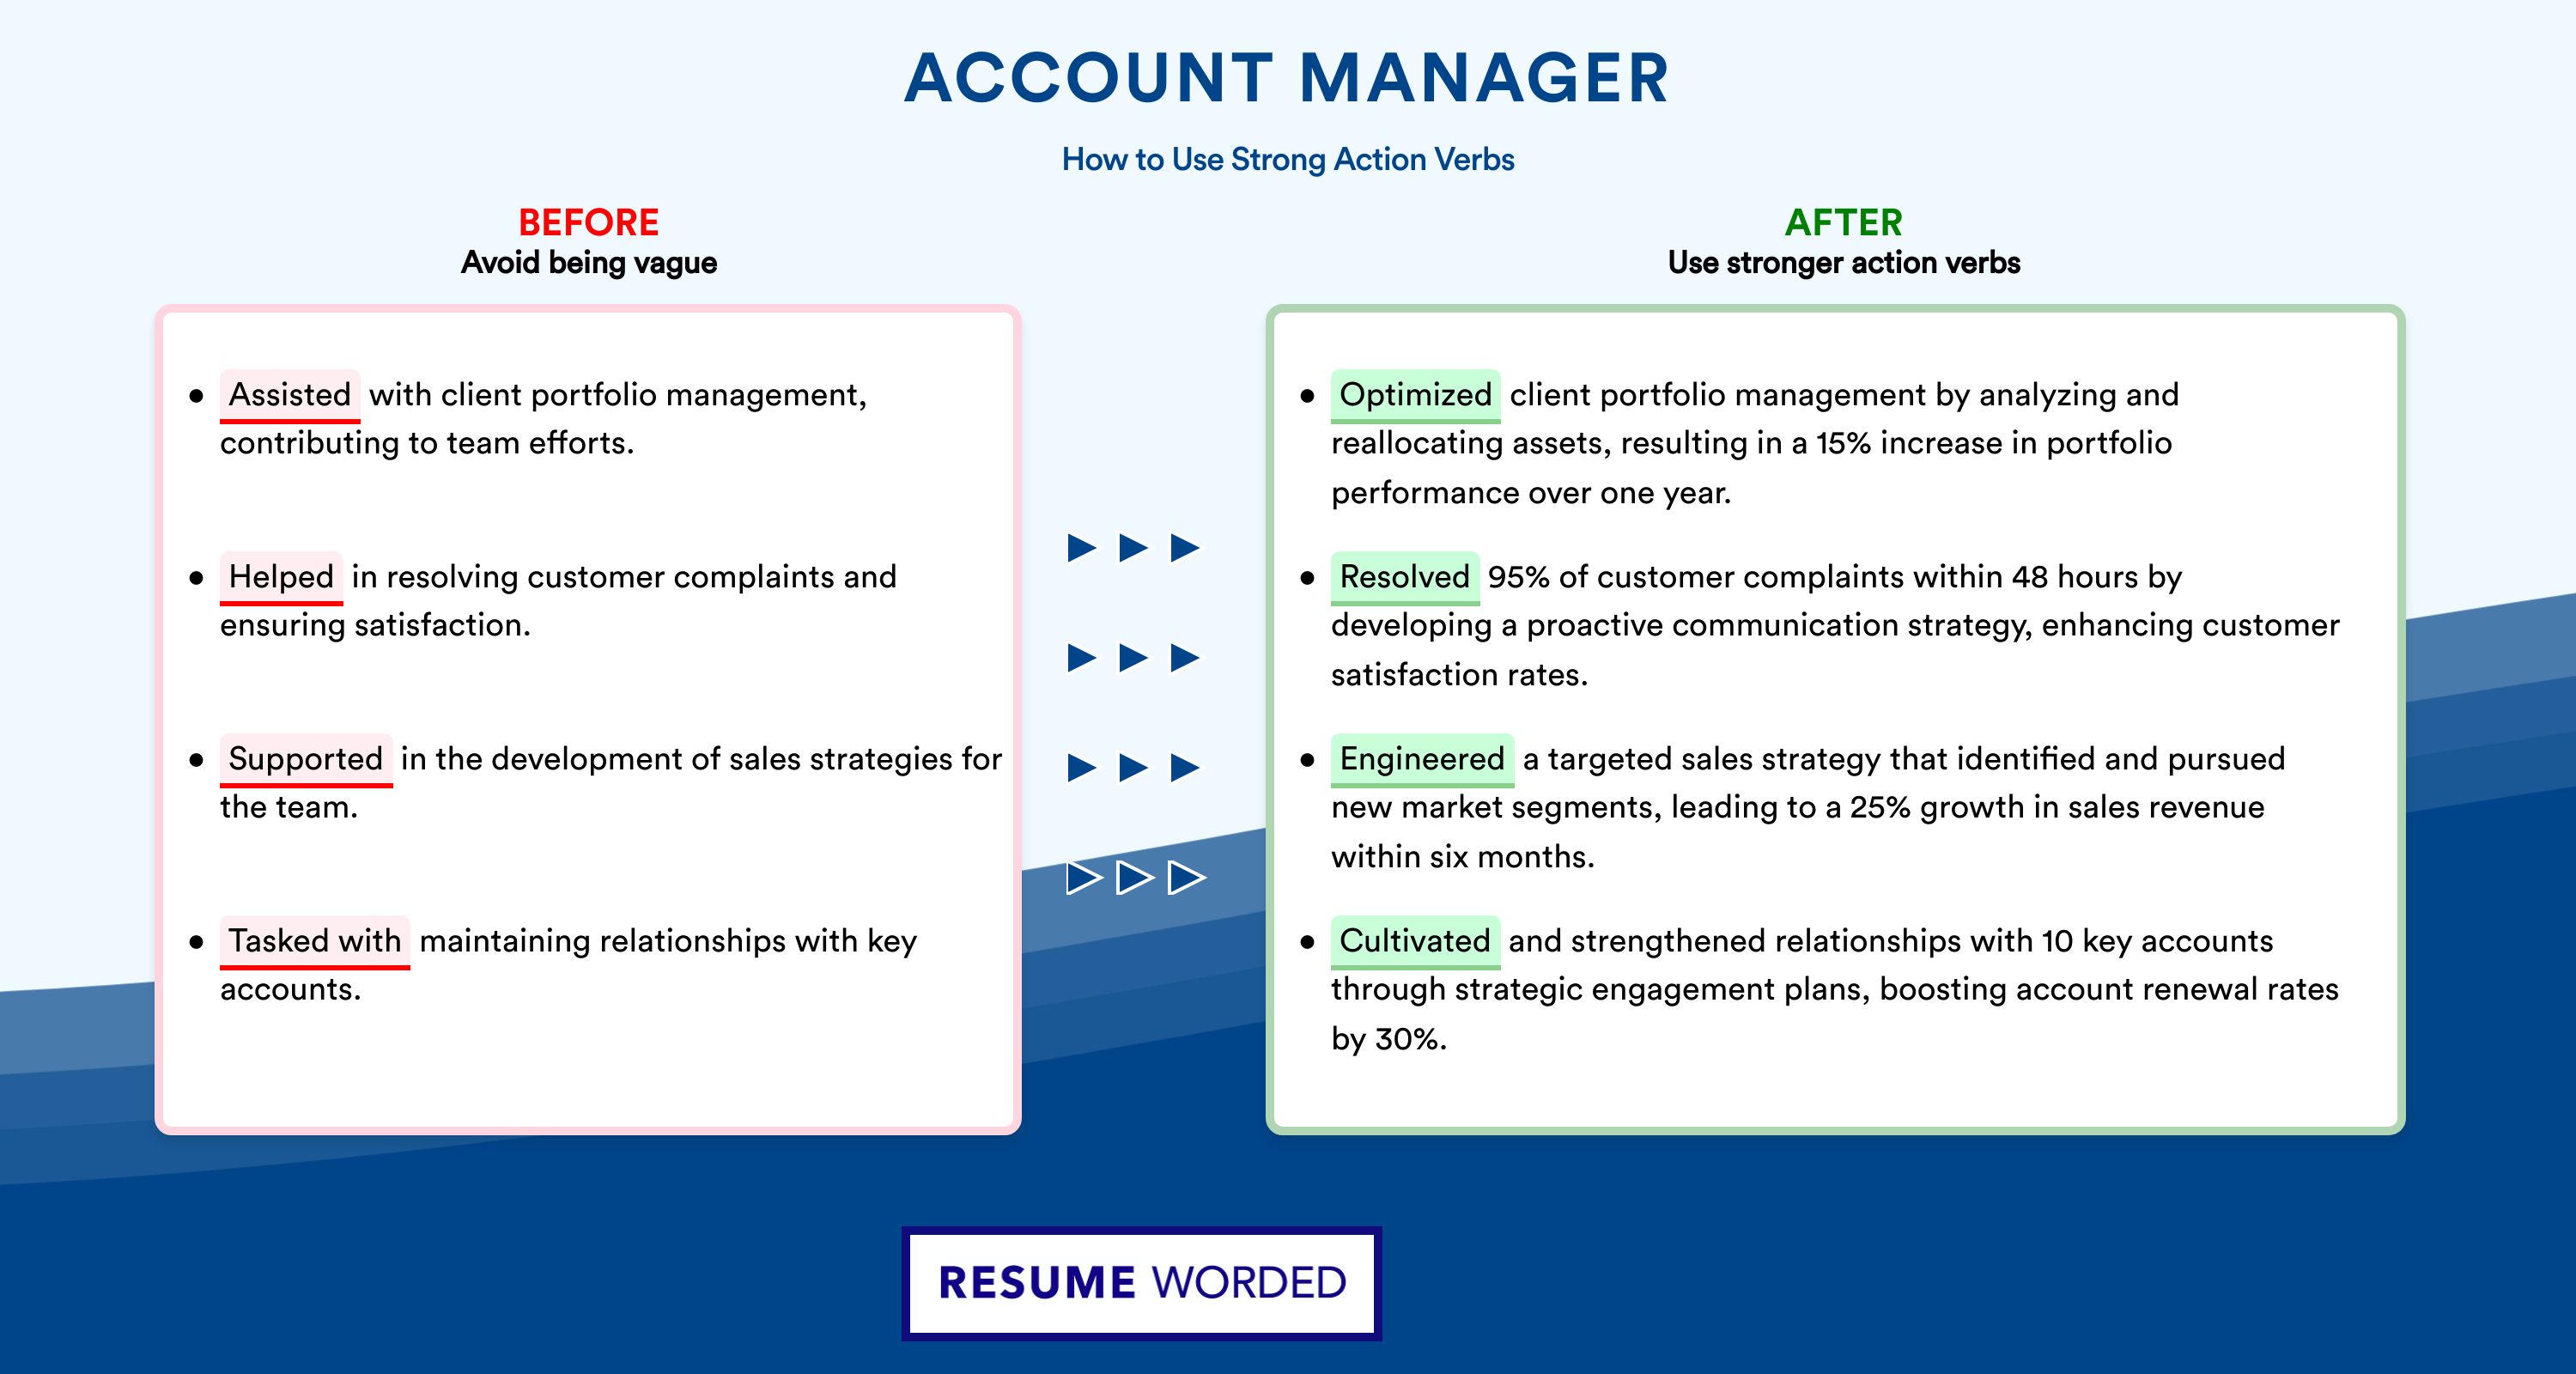 Action Verbs for Account Manager